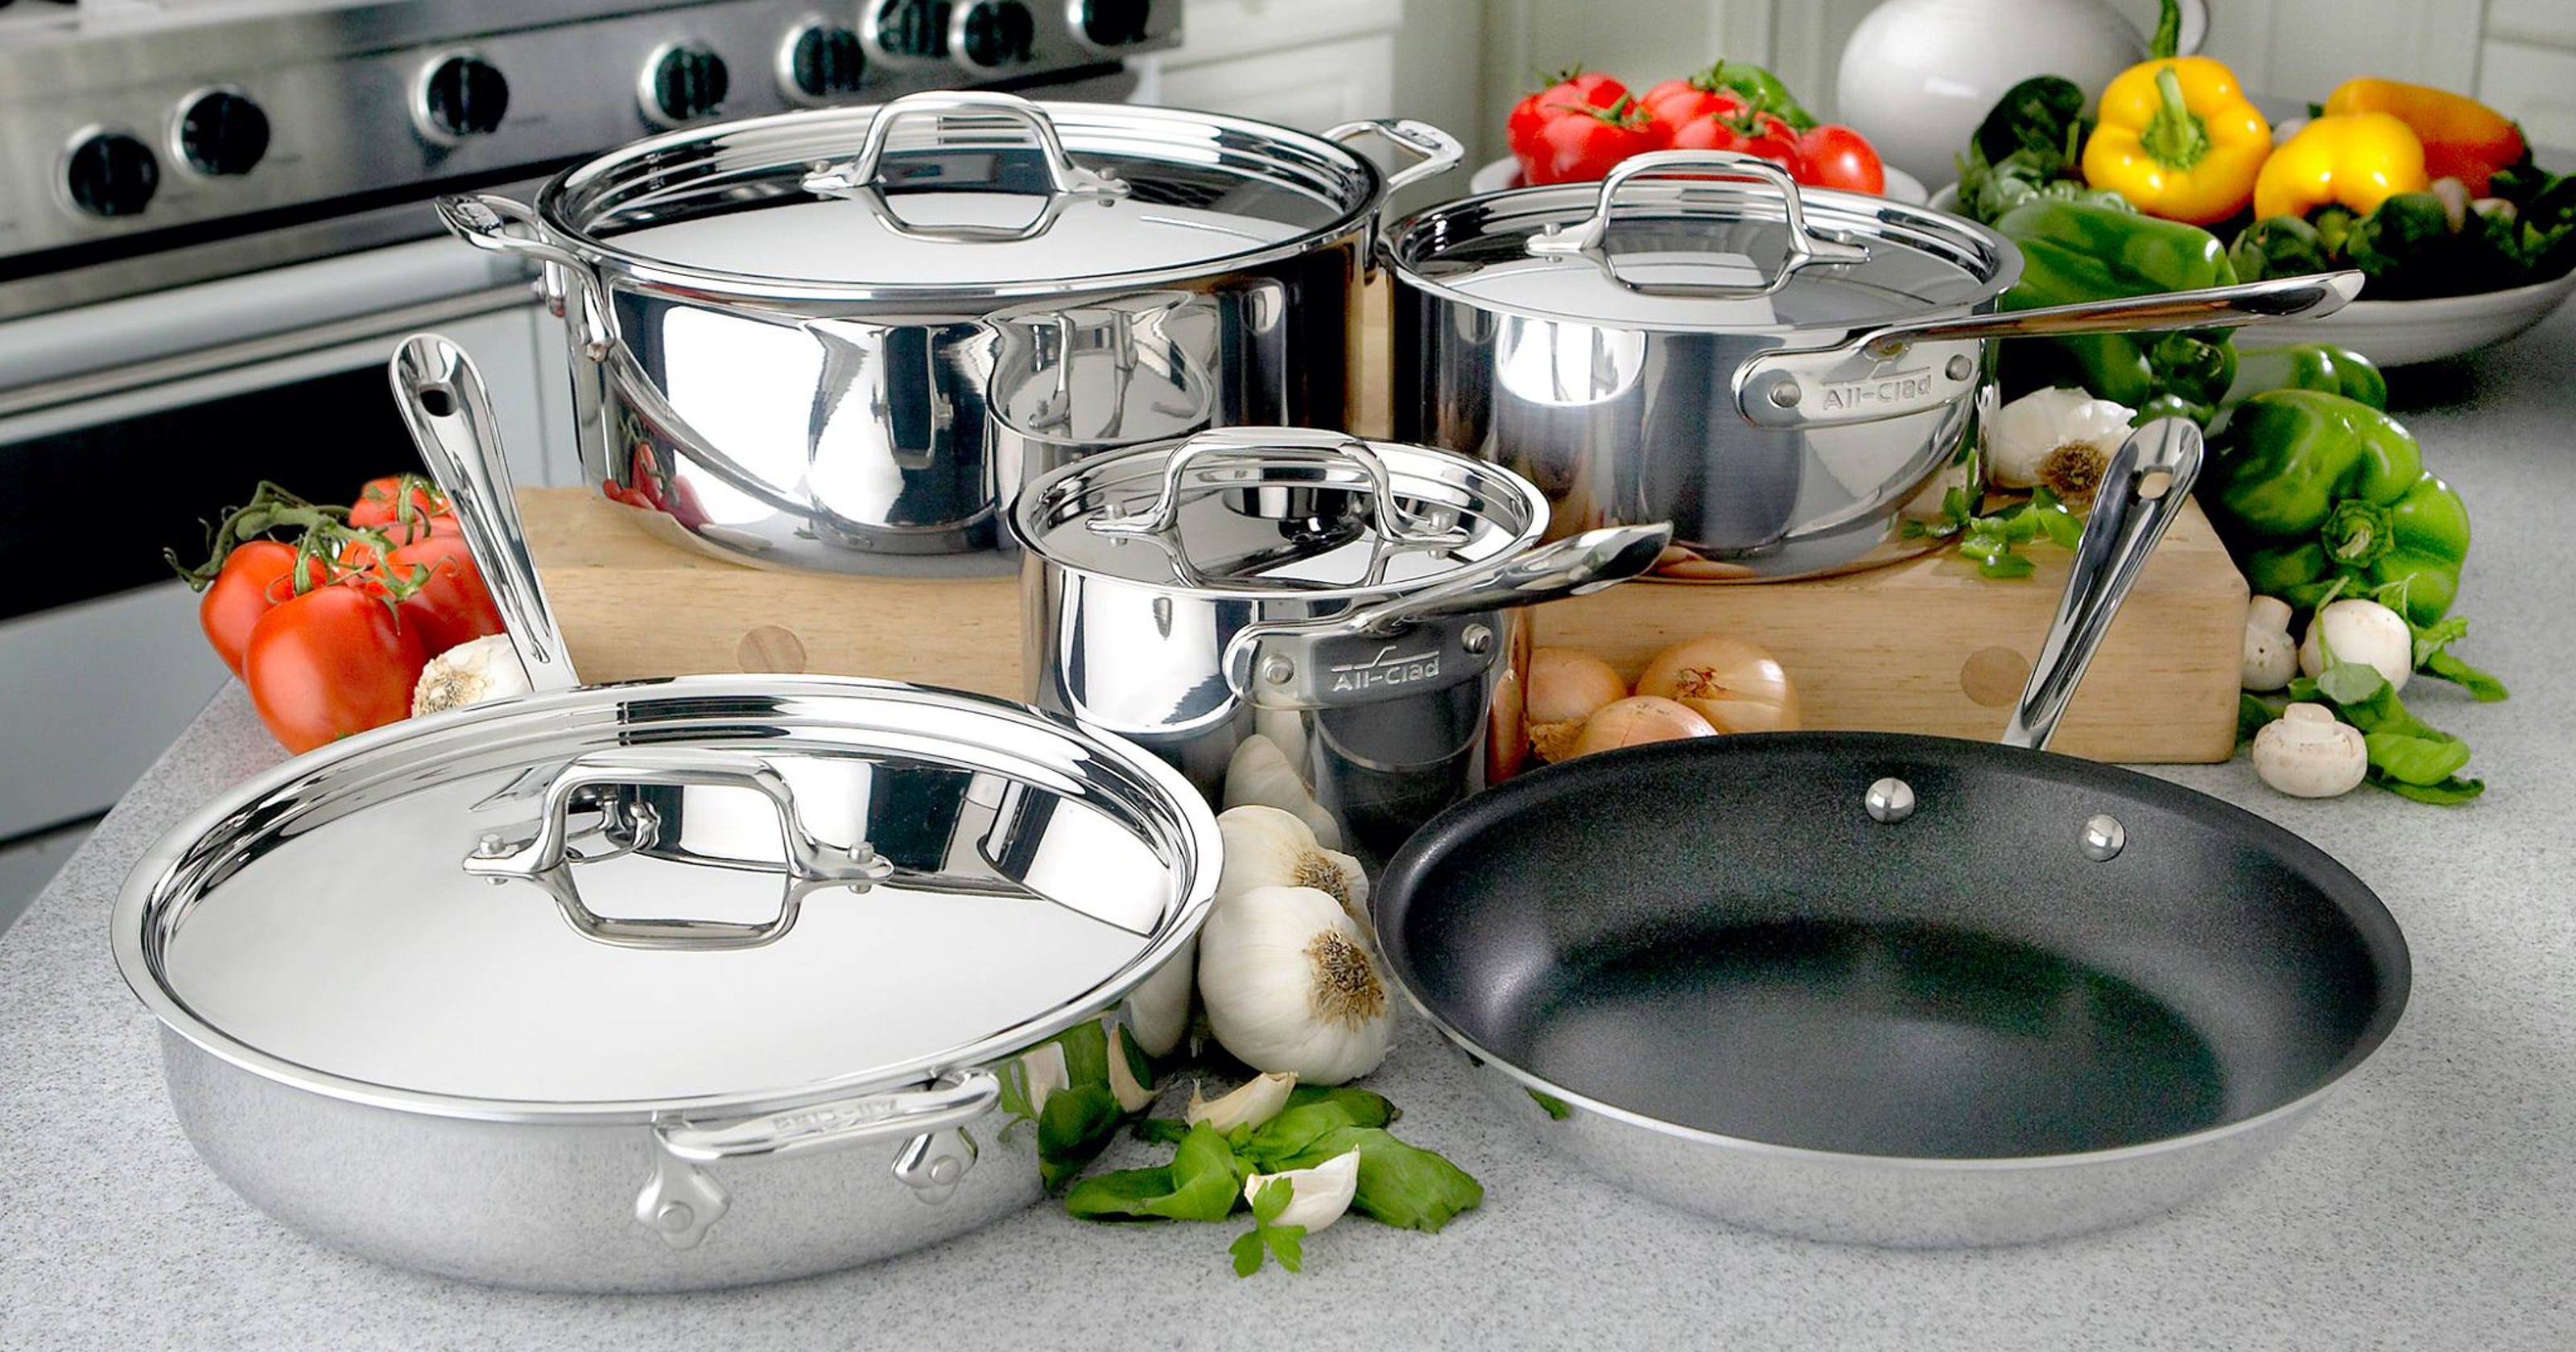 all-clad-clad-pan-copper-core-fry-skillets-inch-ply-cookware-dishwasher